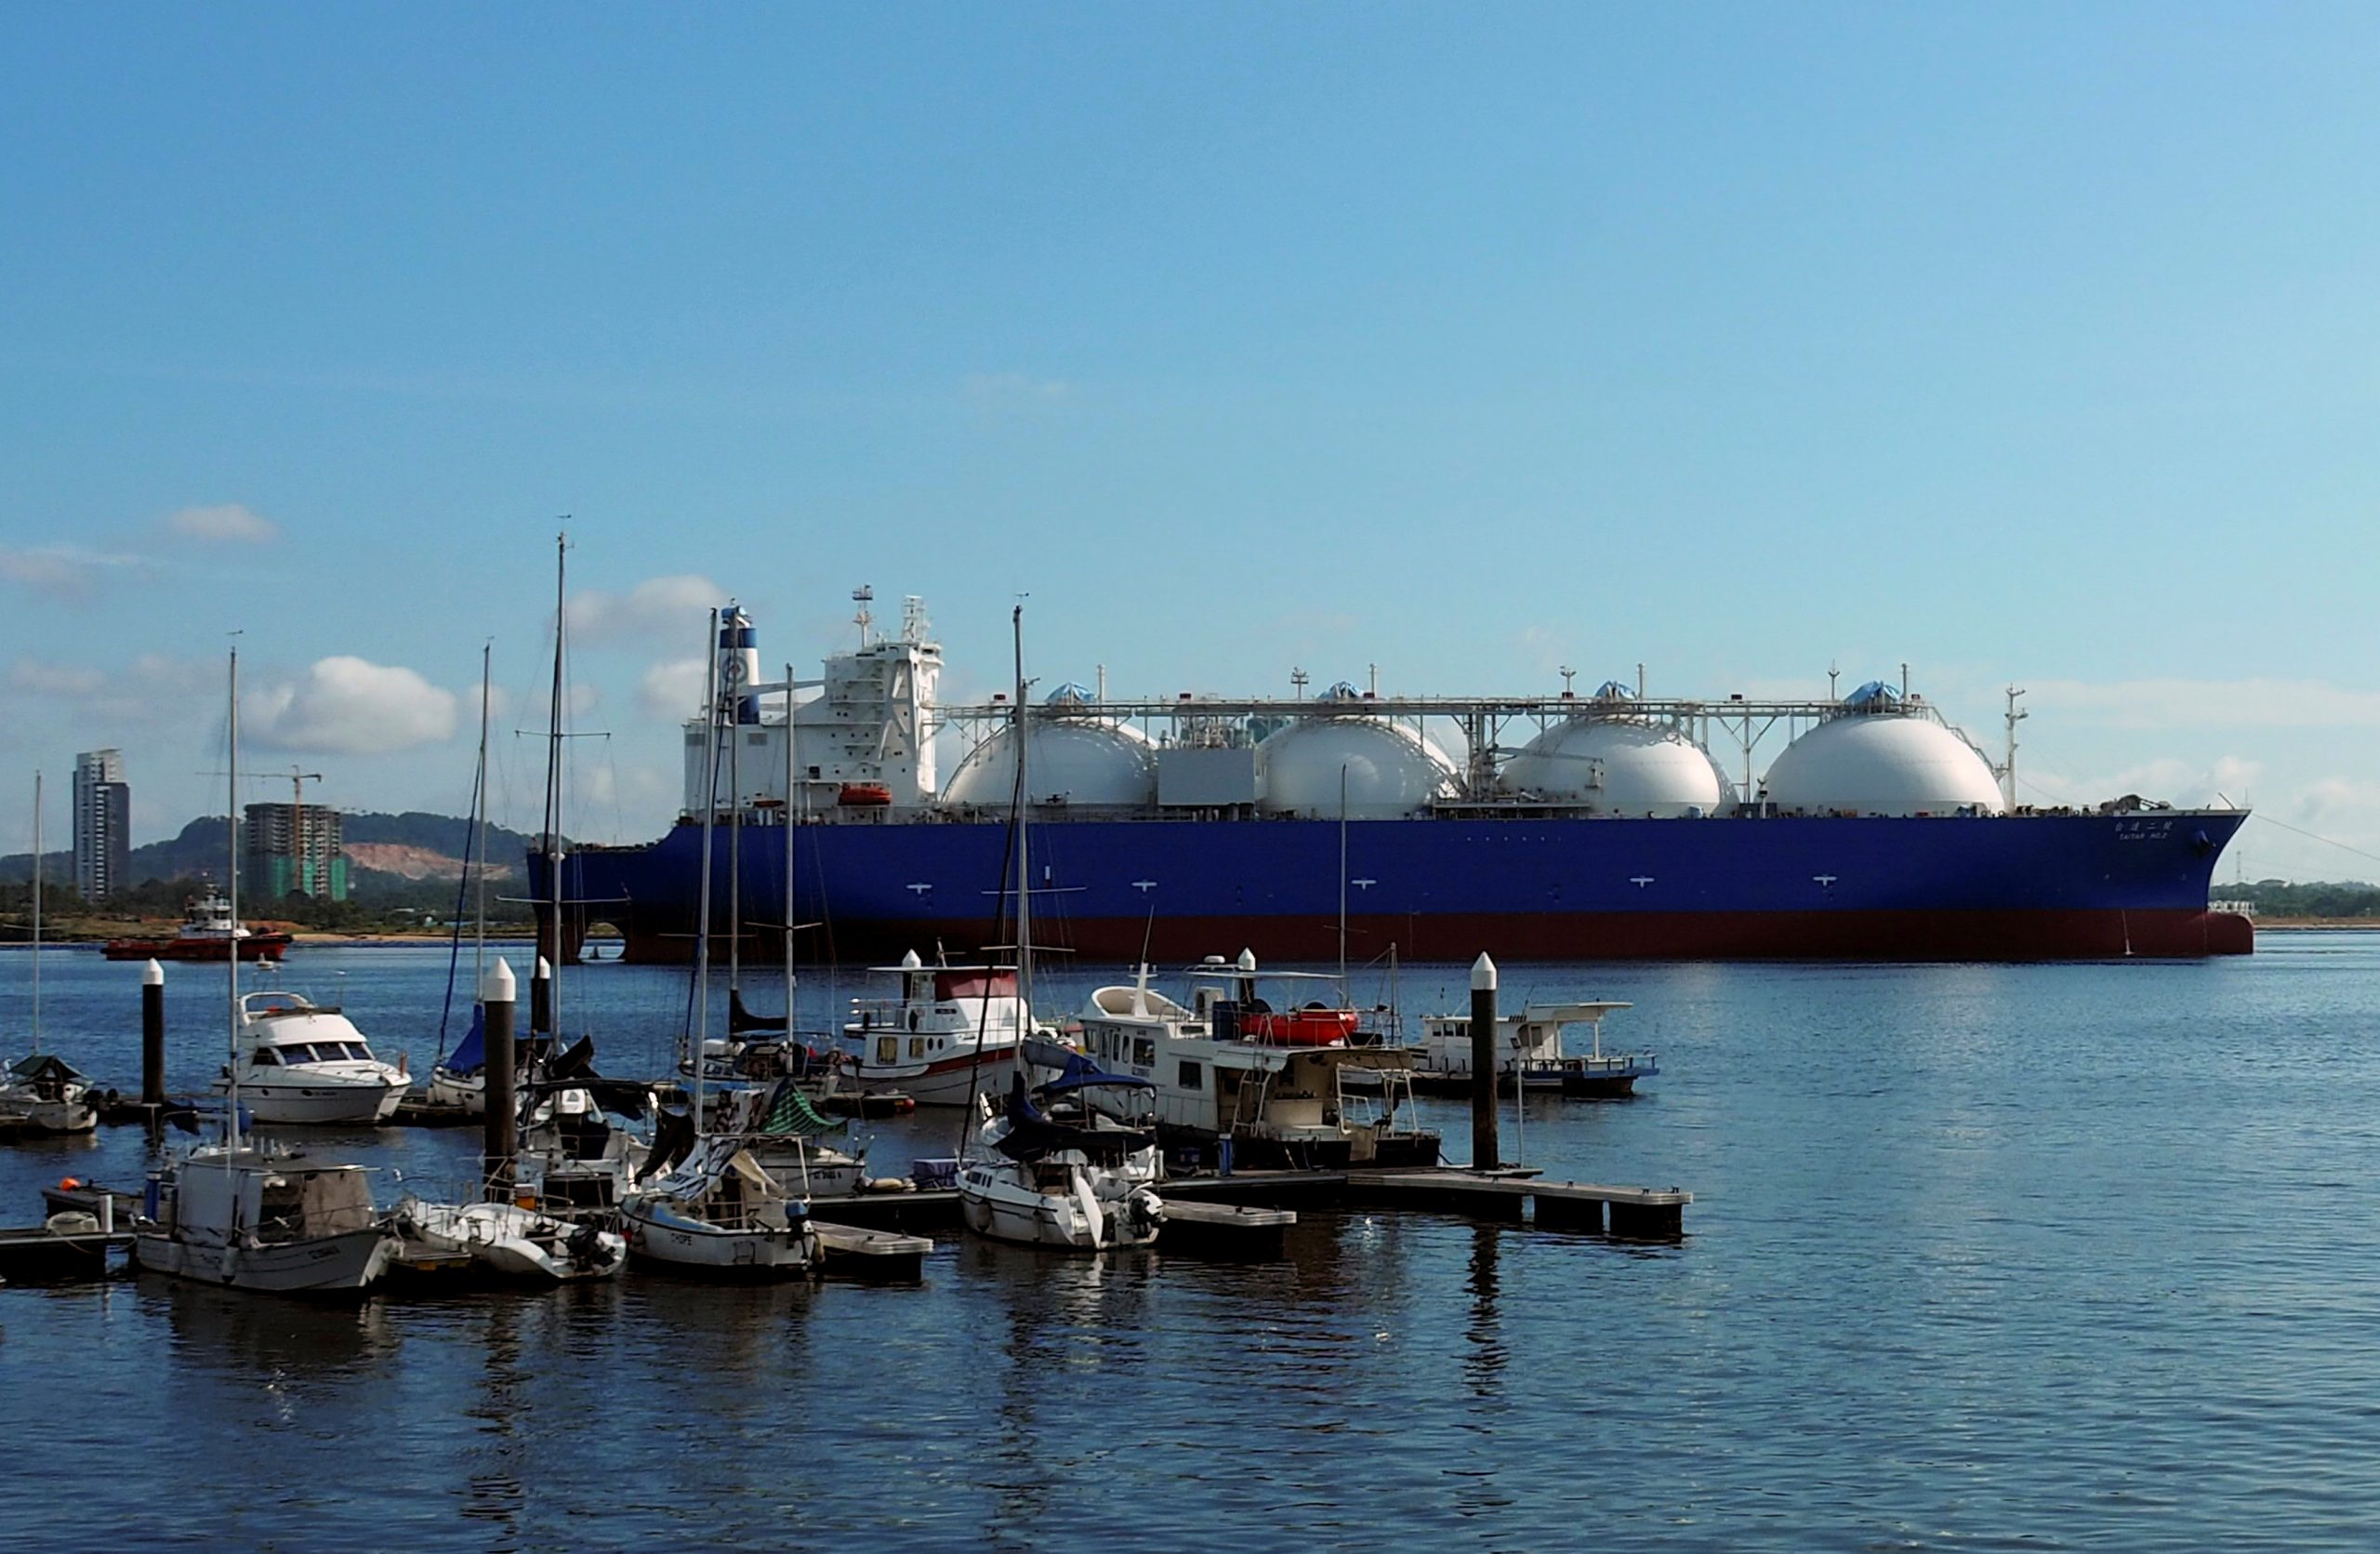 Singapore LNG Scouts for Spot Cargo as Electricity Futures Surge